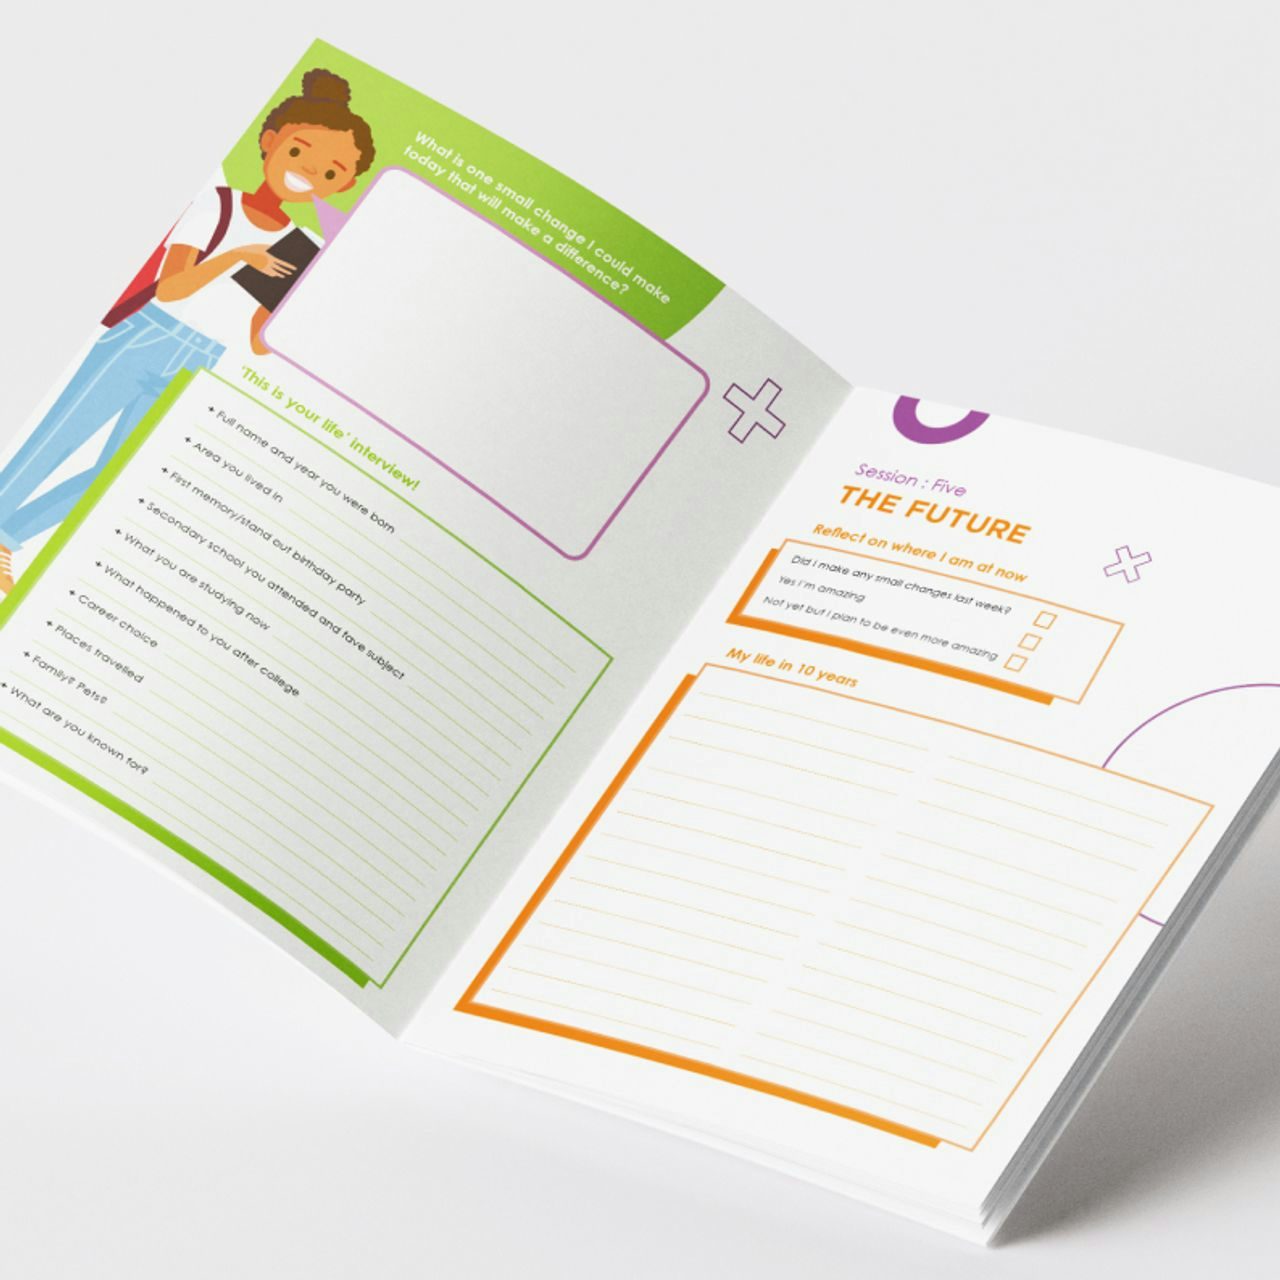 Open interactive brochure with wellbeing and future planning activities, featuring colourful headers and an illustration of a student, designed for educational engagement.